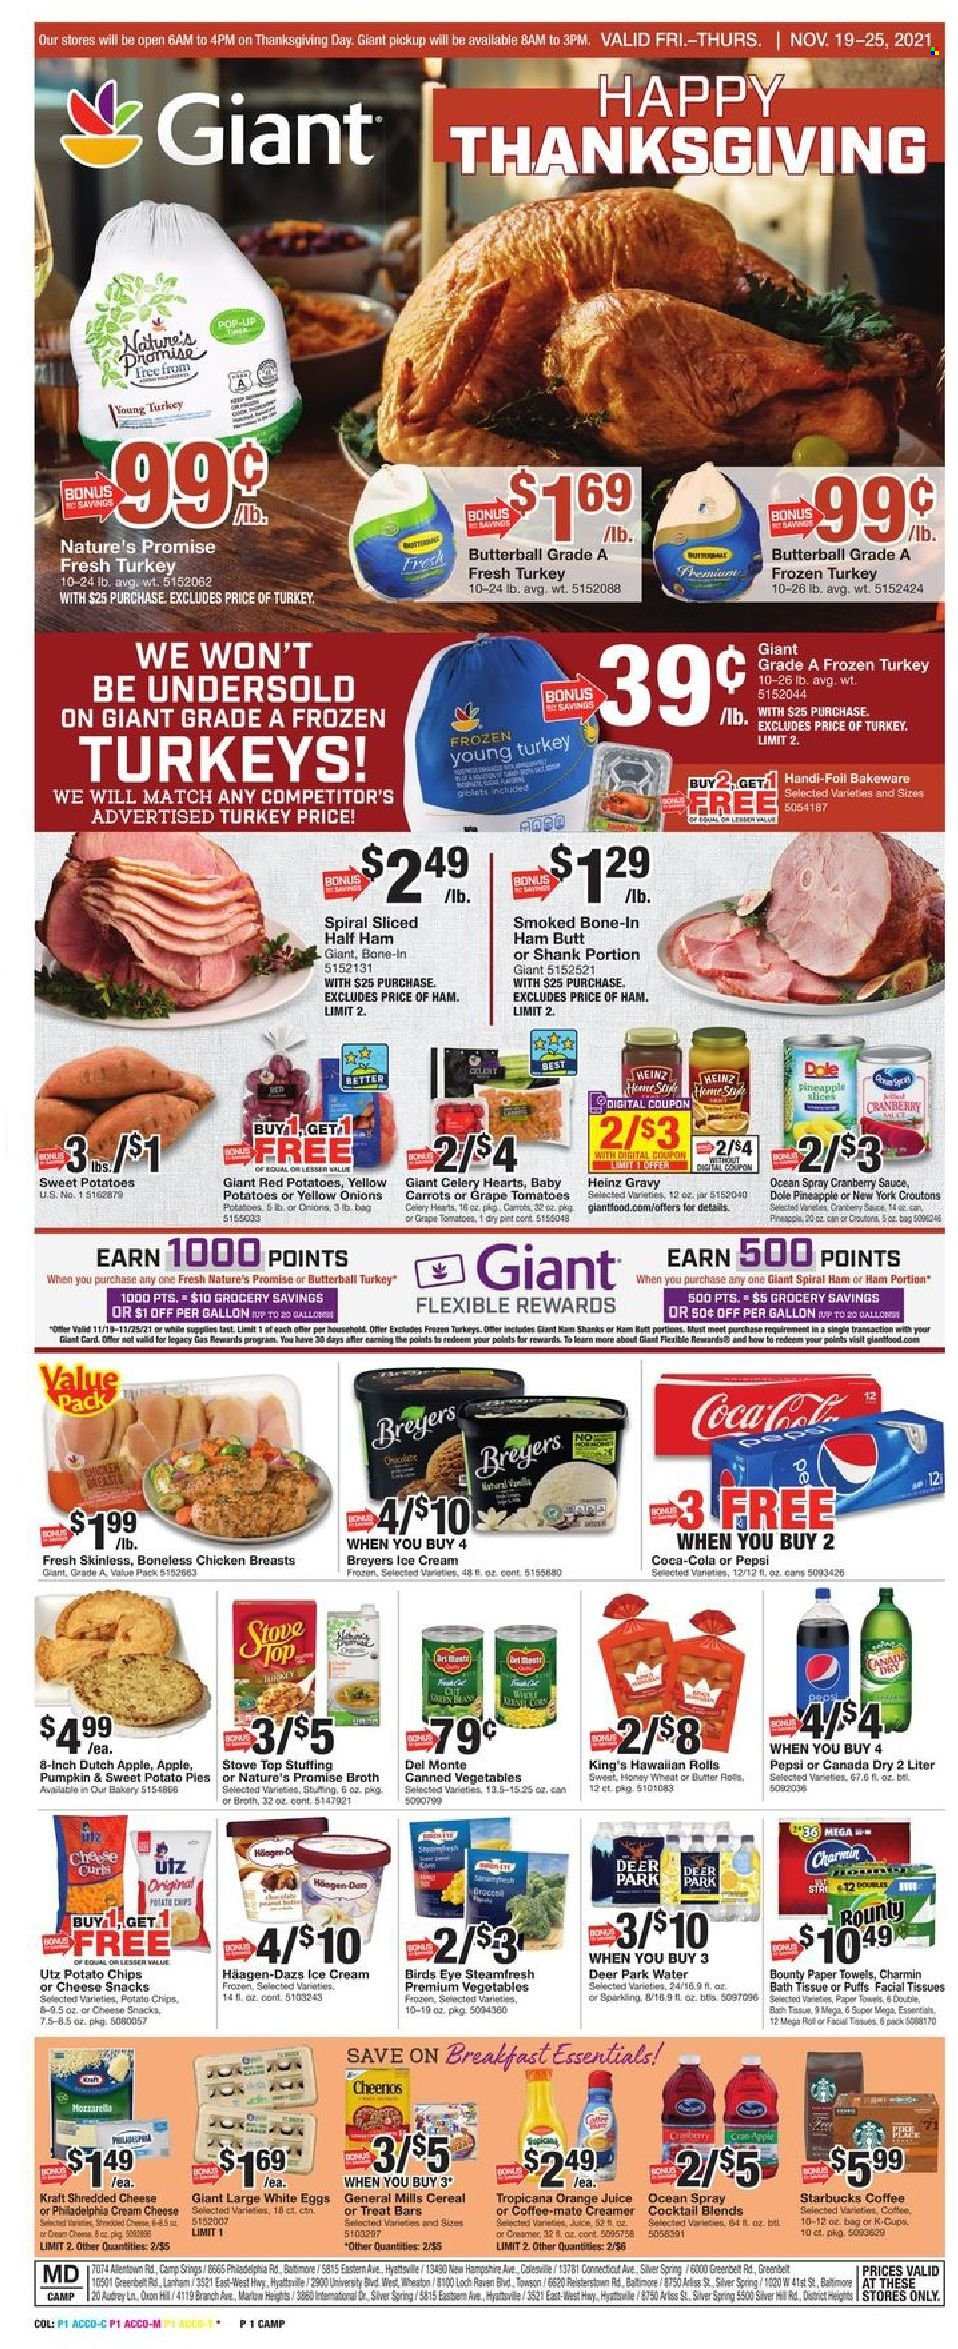 thumbnail - Giant Food Flyer - 11/19/2021 - 11/25/2021 - Sales products - Nature’s Promise, puffs, carrots, celery, onion, Dole, red potatoes, sleeved celery, Bird's Eye, Kraft®, Butterball, half ham, spiral ham, cream cheese, mozzarella, shredded cheese, Coffee-Mate, eggs, creamer, ice cream, Häagen-Dazs, snack, Bounty, potato chips, croutons, broth, Heinz, canned vegetables, cereals, cranberry sauce, Canada Dry, Coca-Cola, Pepsi, orange juice, juice, Starbucks, whole turkey, chicken breasts, bath tissue, kitchen towels, paper towels, Charmin, facial tissues, bakeware. Page 1.